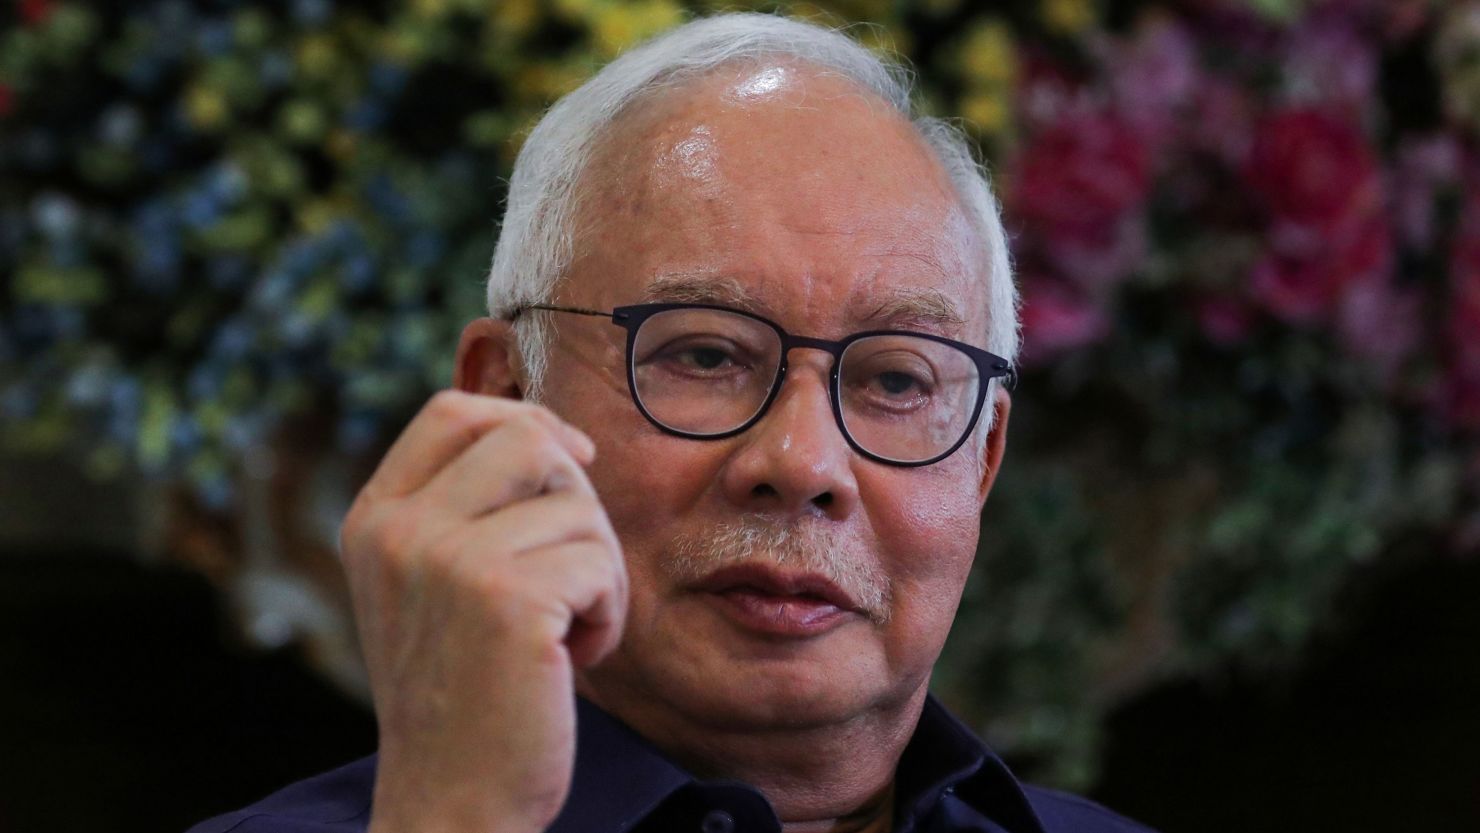 Malaysia's former Prime Minister Najib Razak speaks during an interview with Reuters in Kuala Lumpur, Malaysia on September 18, 2021. 